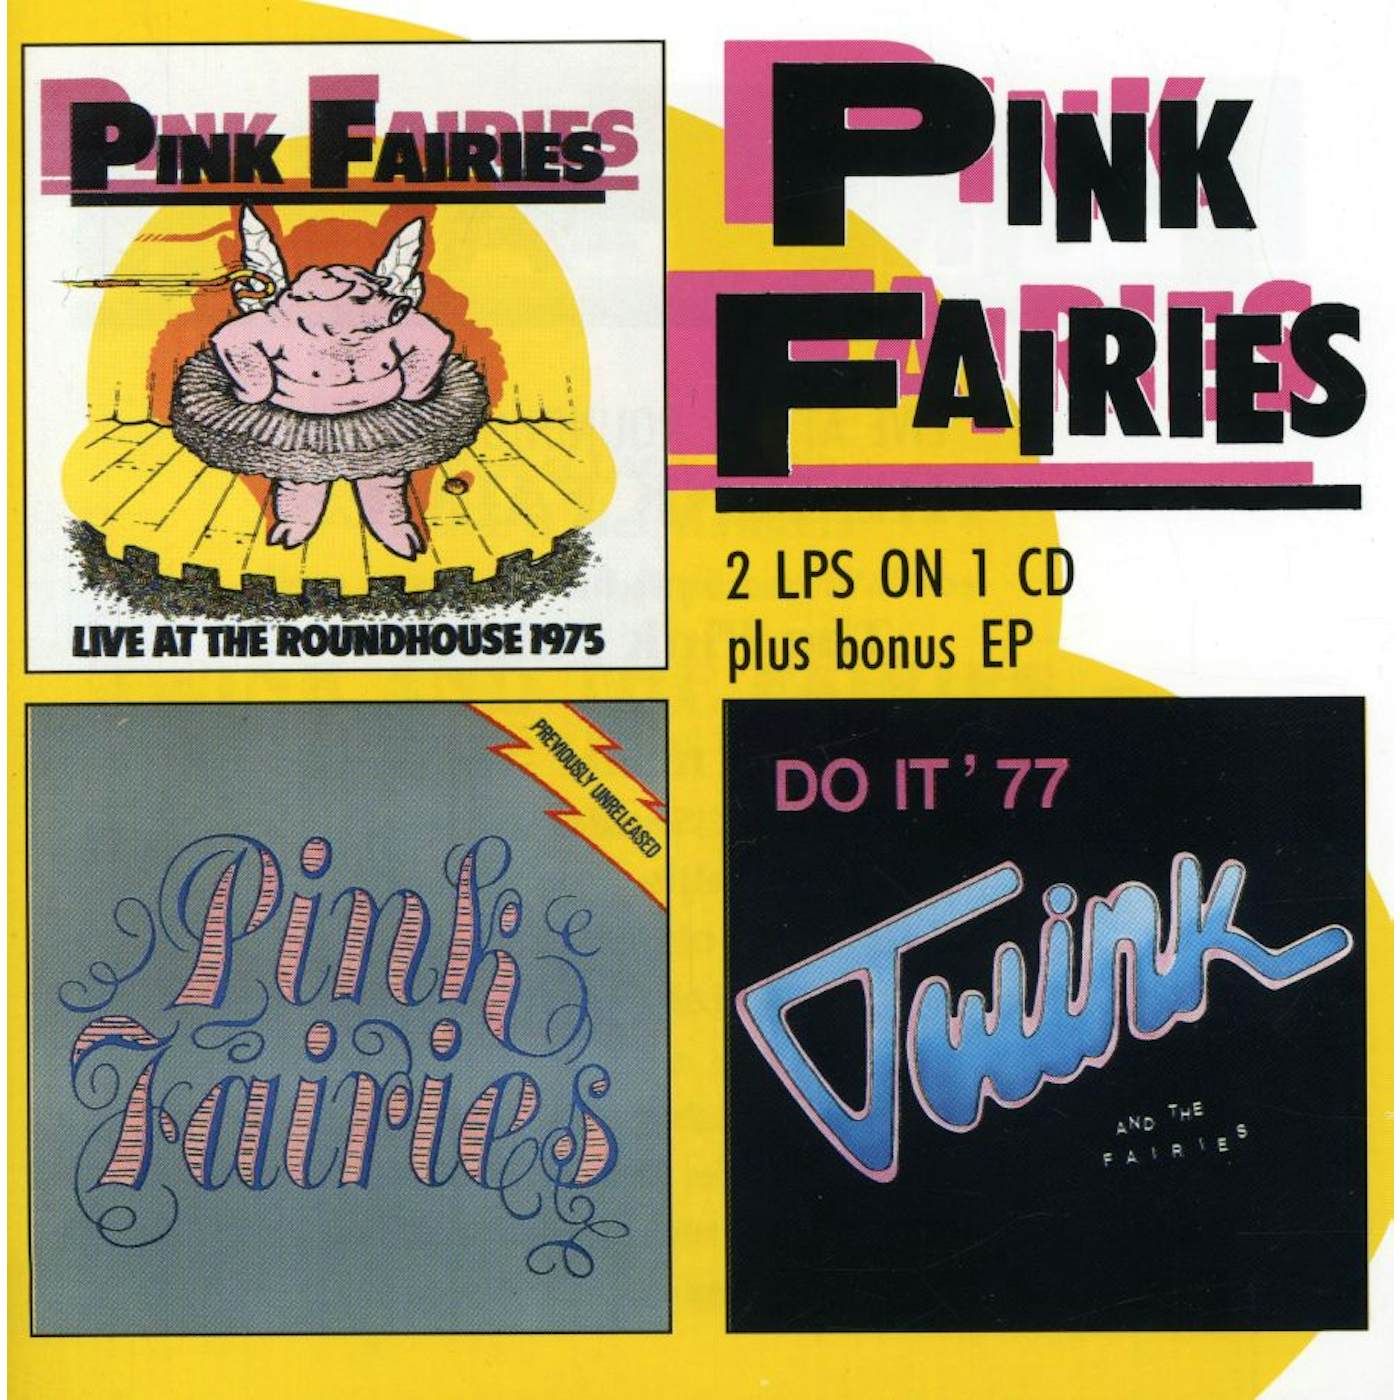 The Pink Fairies LIVE AT ROUNDHOUSE / PREVIOUSLY UNRELEASED / DO IT CD